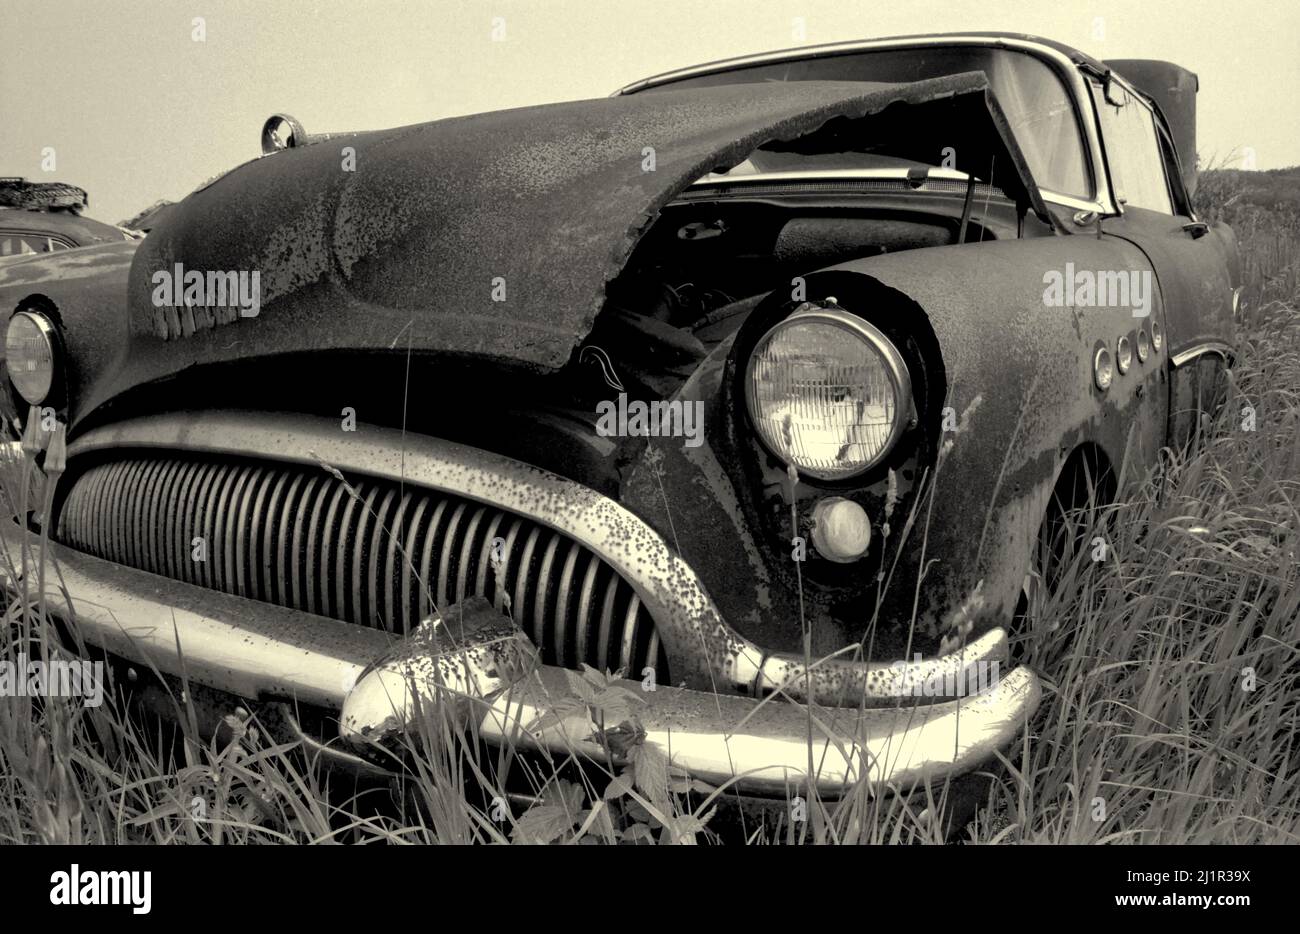 Buick in scrap yard, Black and White image. Ontario Canada Stock Photo